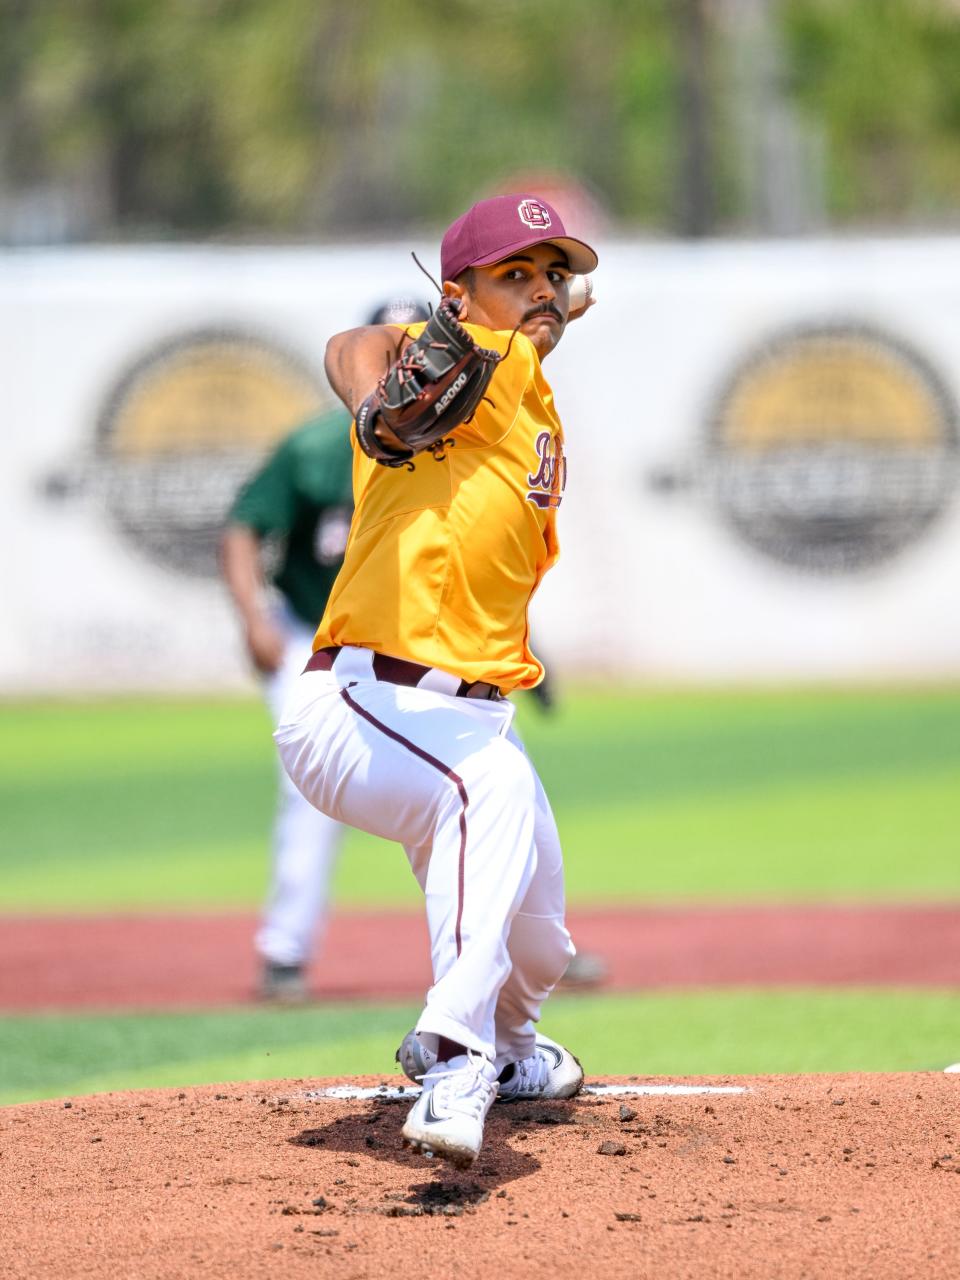 Bethune-Cookman left-hander Daniel Gaviria was named Preseason Pitcher of the Year in the Southwestern Athletic Conference.